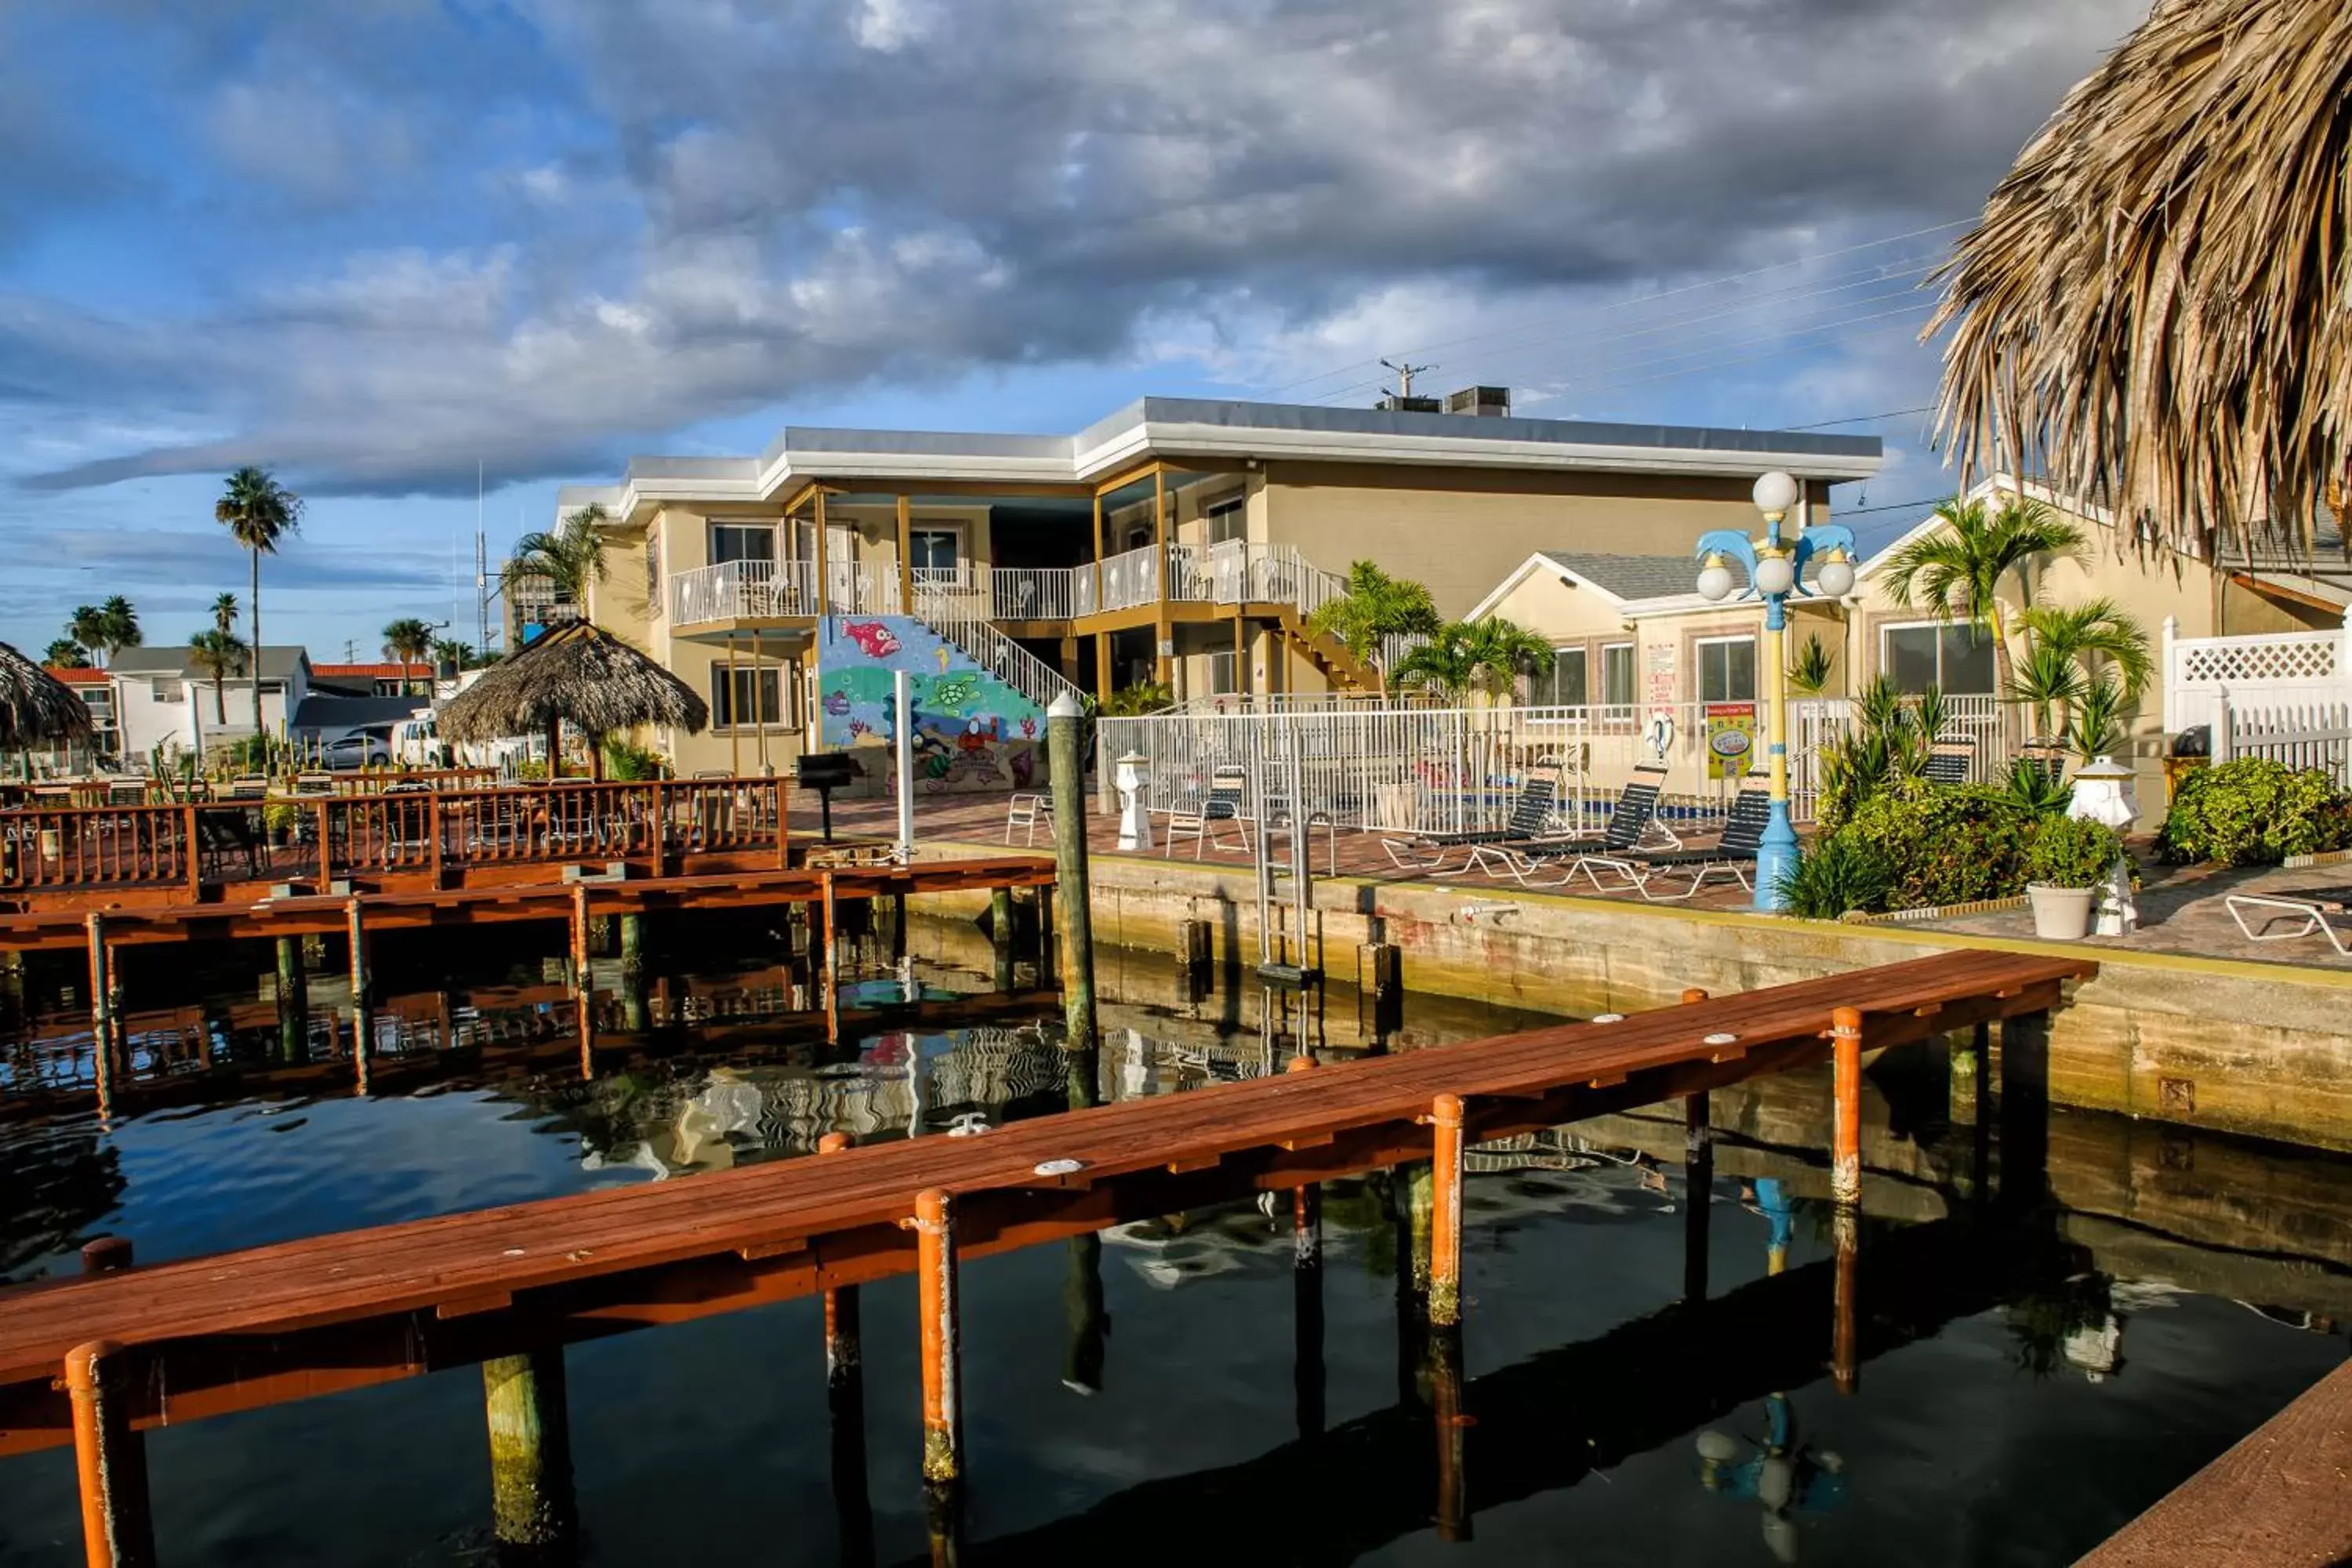 Property building in Bay Palms Waterfront Resort - Hotel and Marina